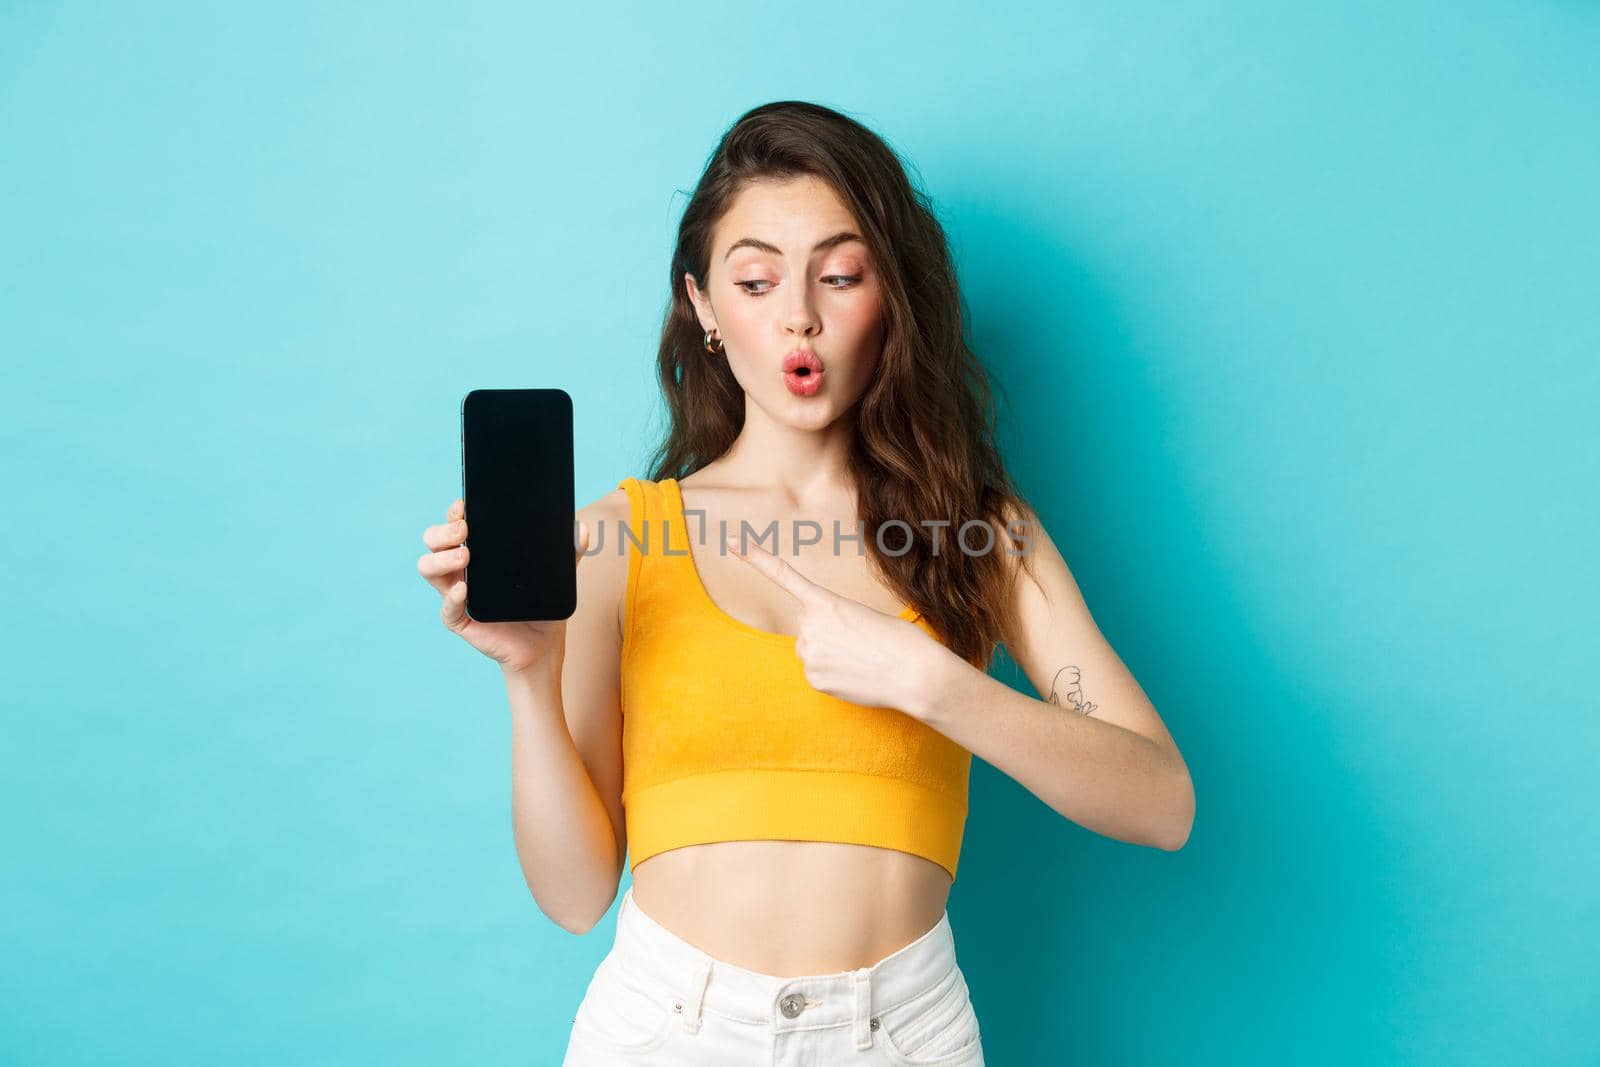 Young excited woman in summer cropped top, pointing and looking at empty smartphone screen, showing app or online shop, standing over blue background.